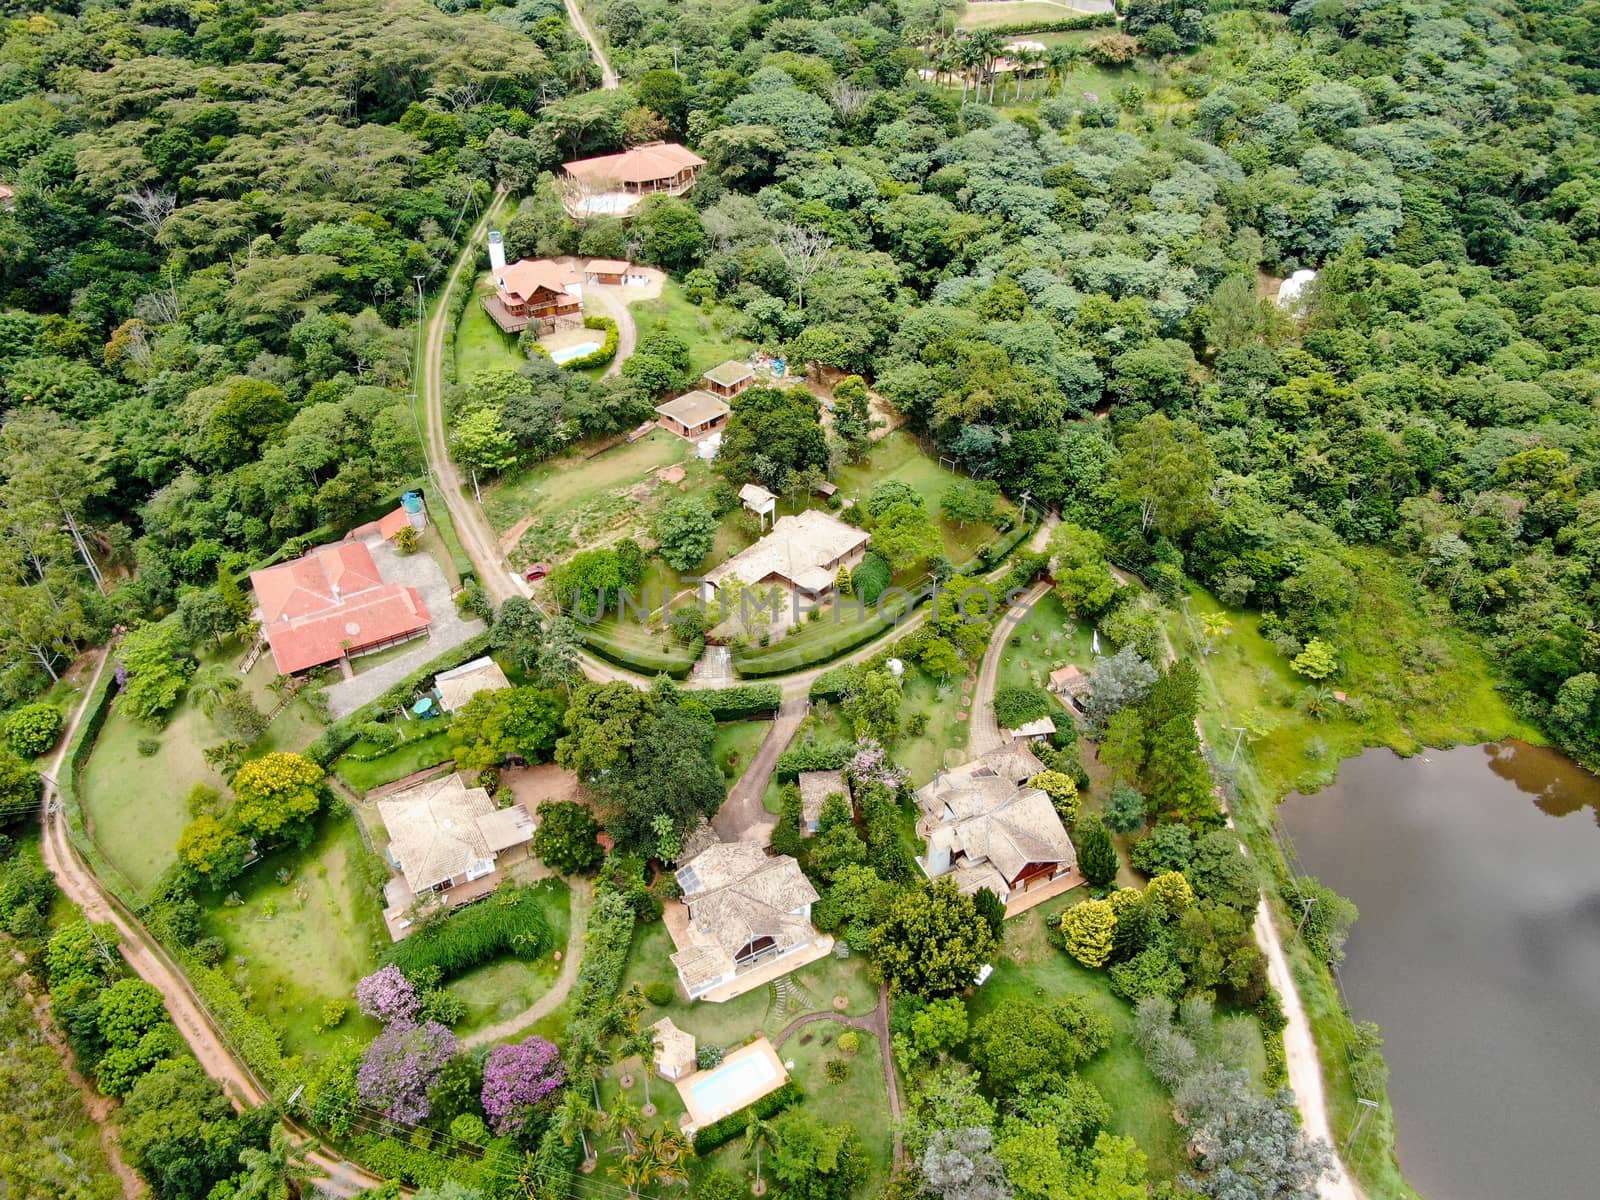 Aerial view of valley with lake, forest and villas in tropical country. Green mountain with forest on Brazil